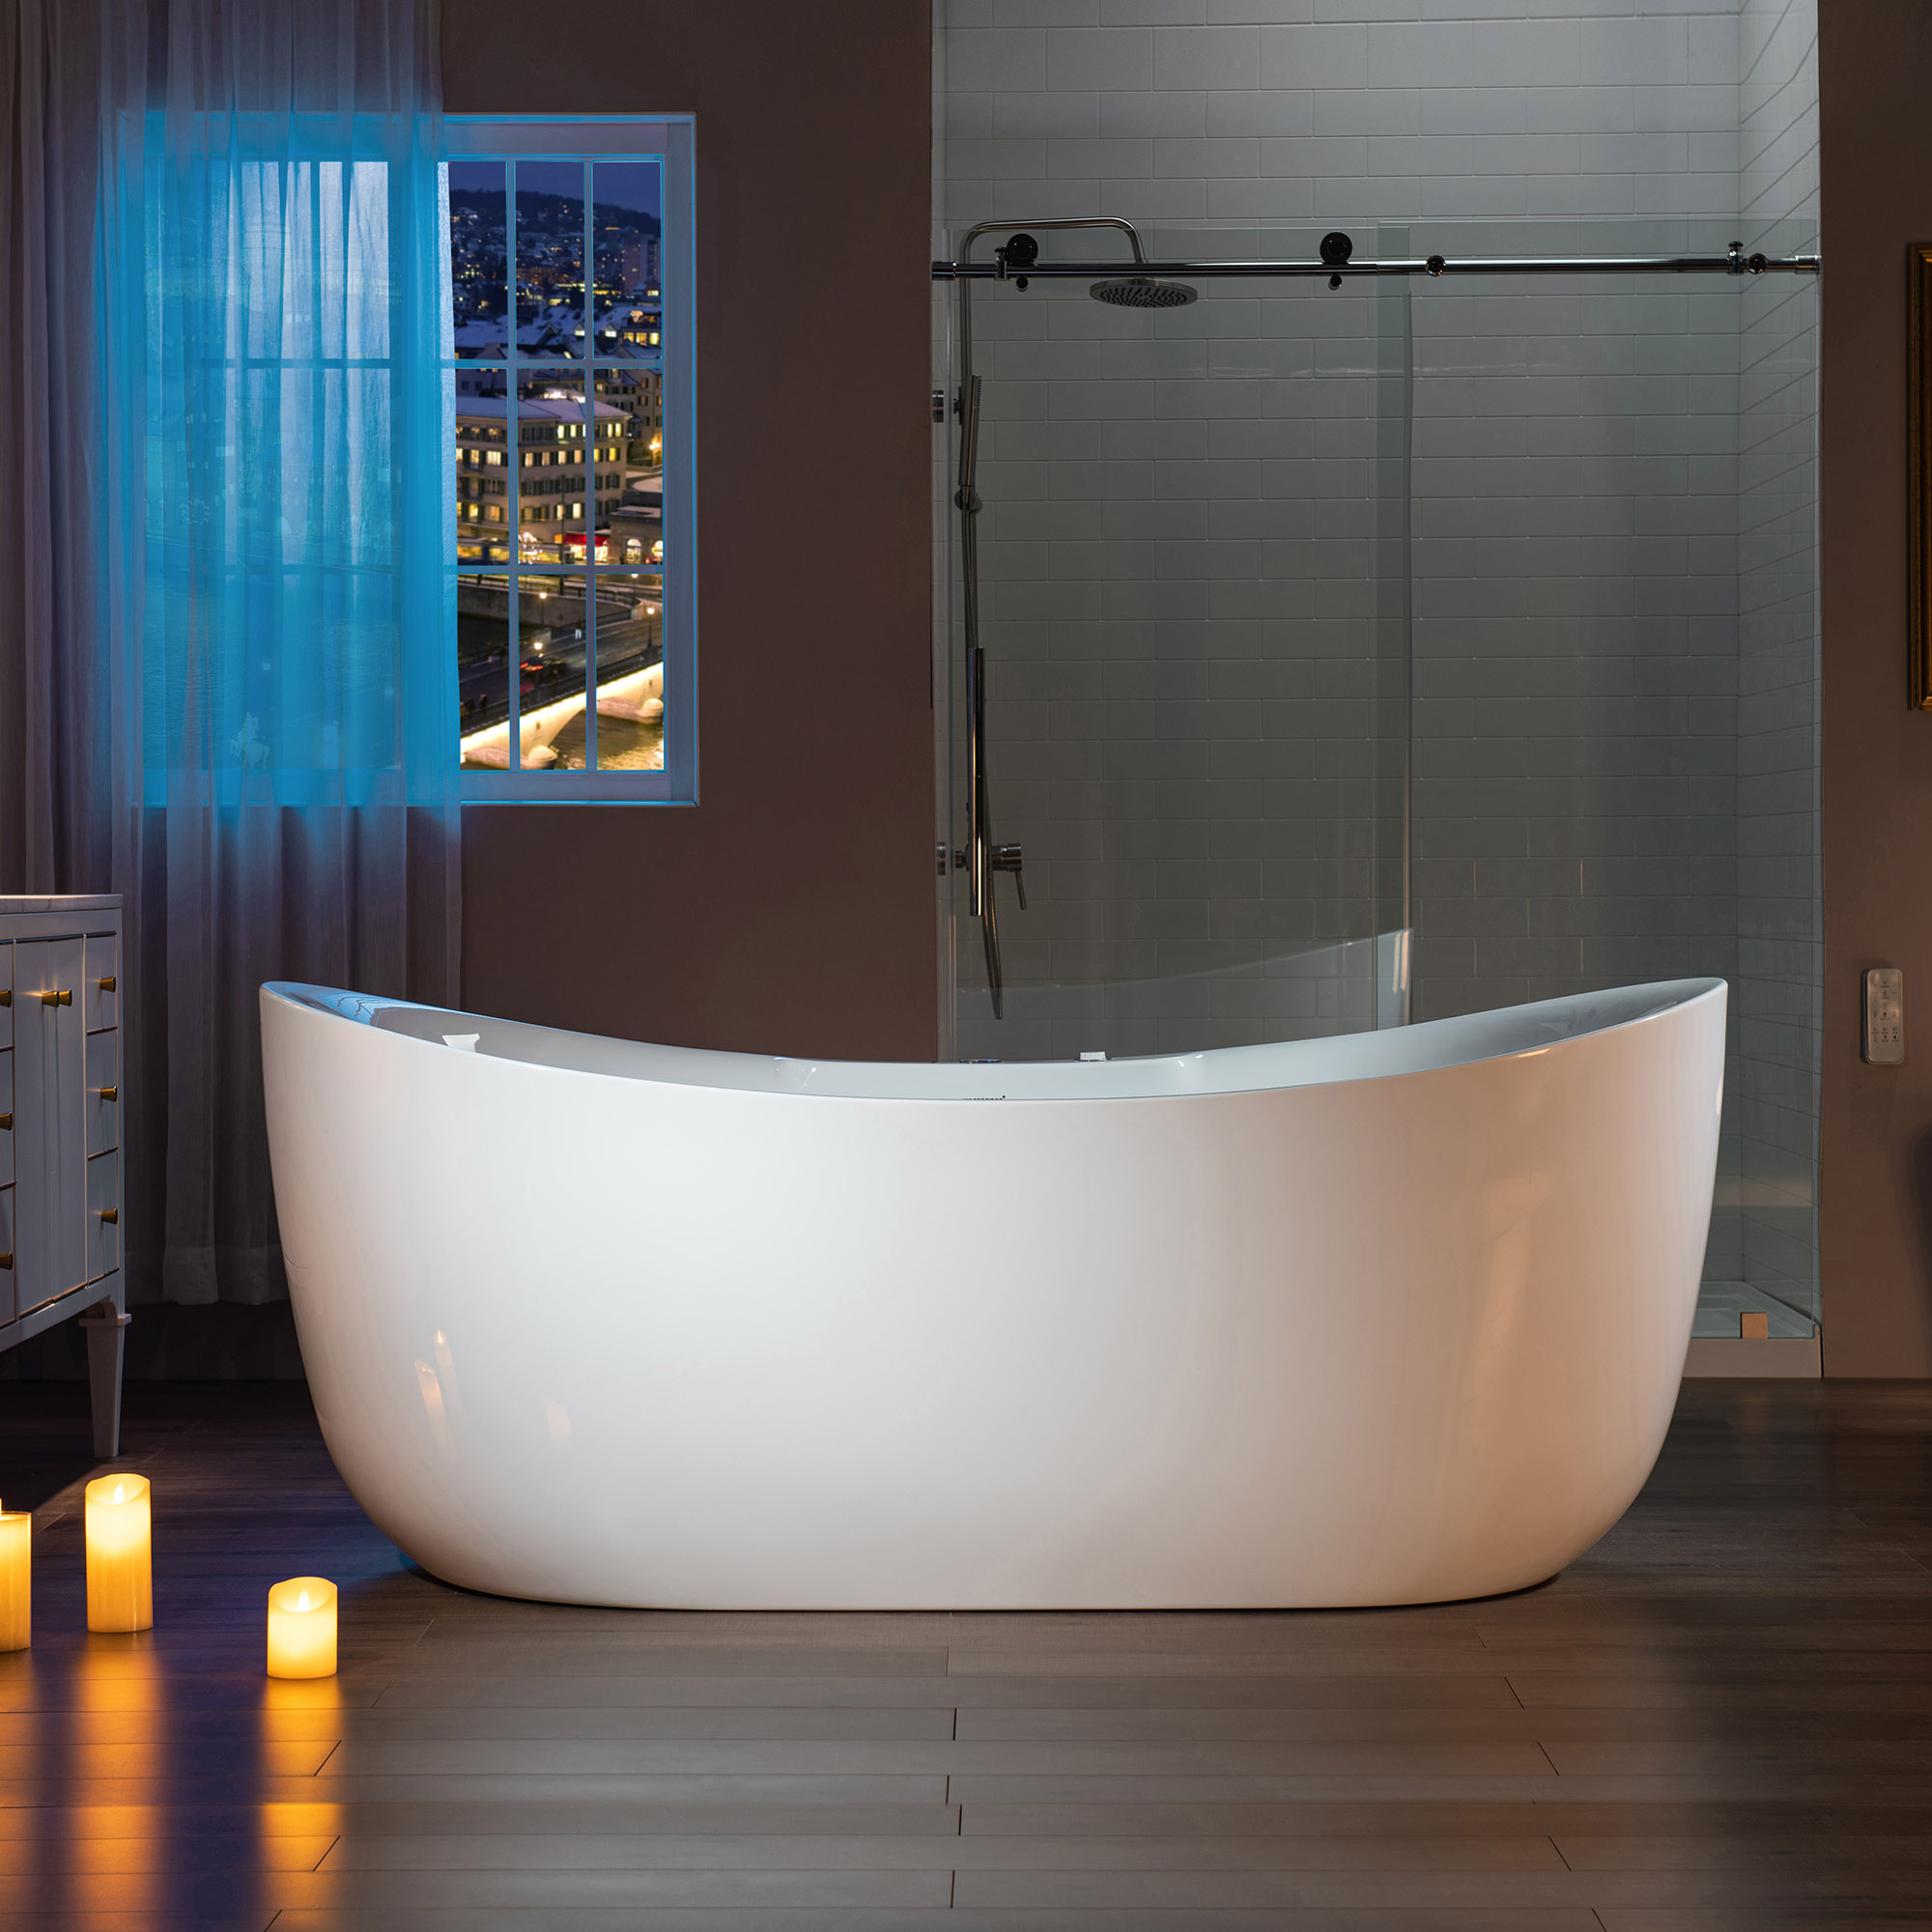 Freestanding vs Built In Bathtubs Pros and Cons